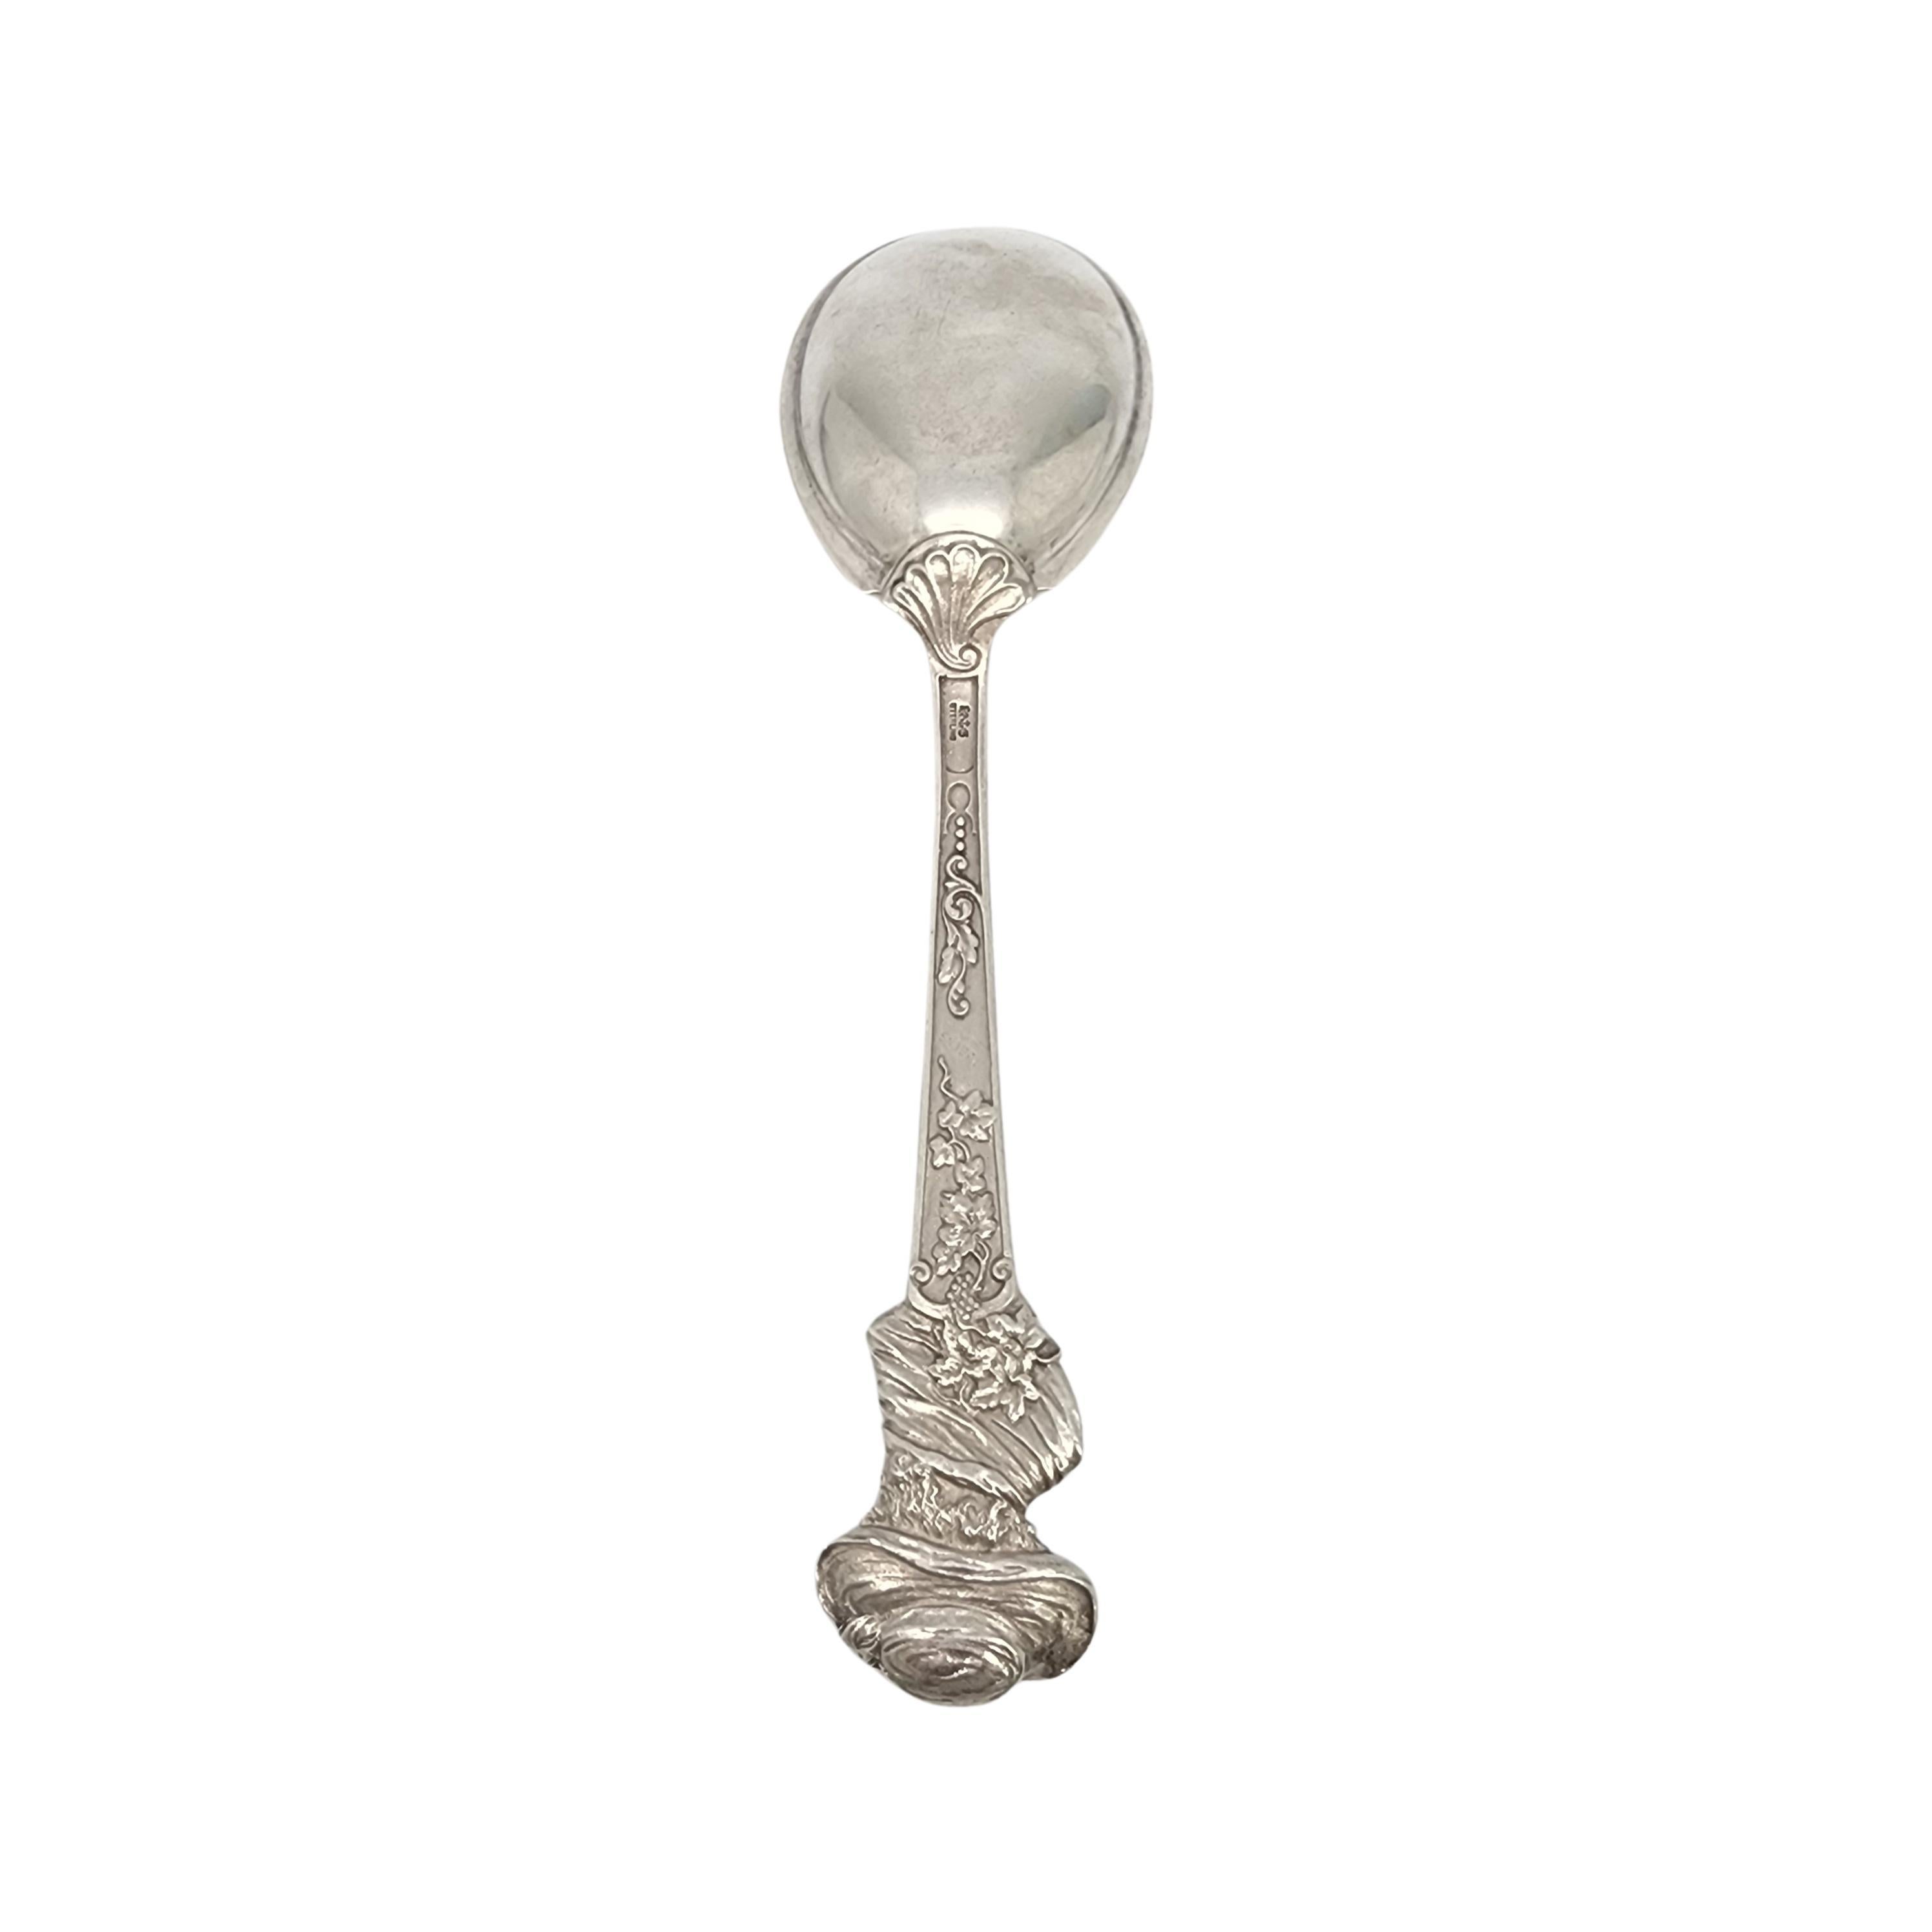 Sterling silver gold wash bowl serving berry spoon in the Old Masters pattern by Gorham.

No monogram.

Designed by Antoine Heller in 1885, the Old Masters pattern is a multi-motif pattern depicting 25 different artists. This large serving spoon